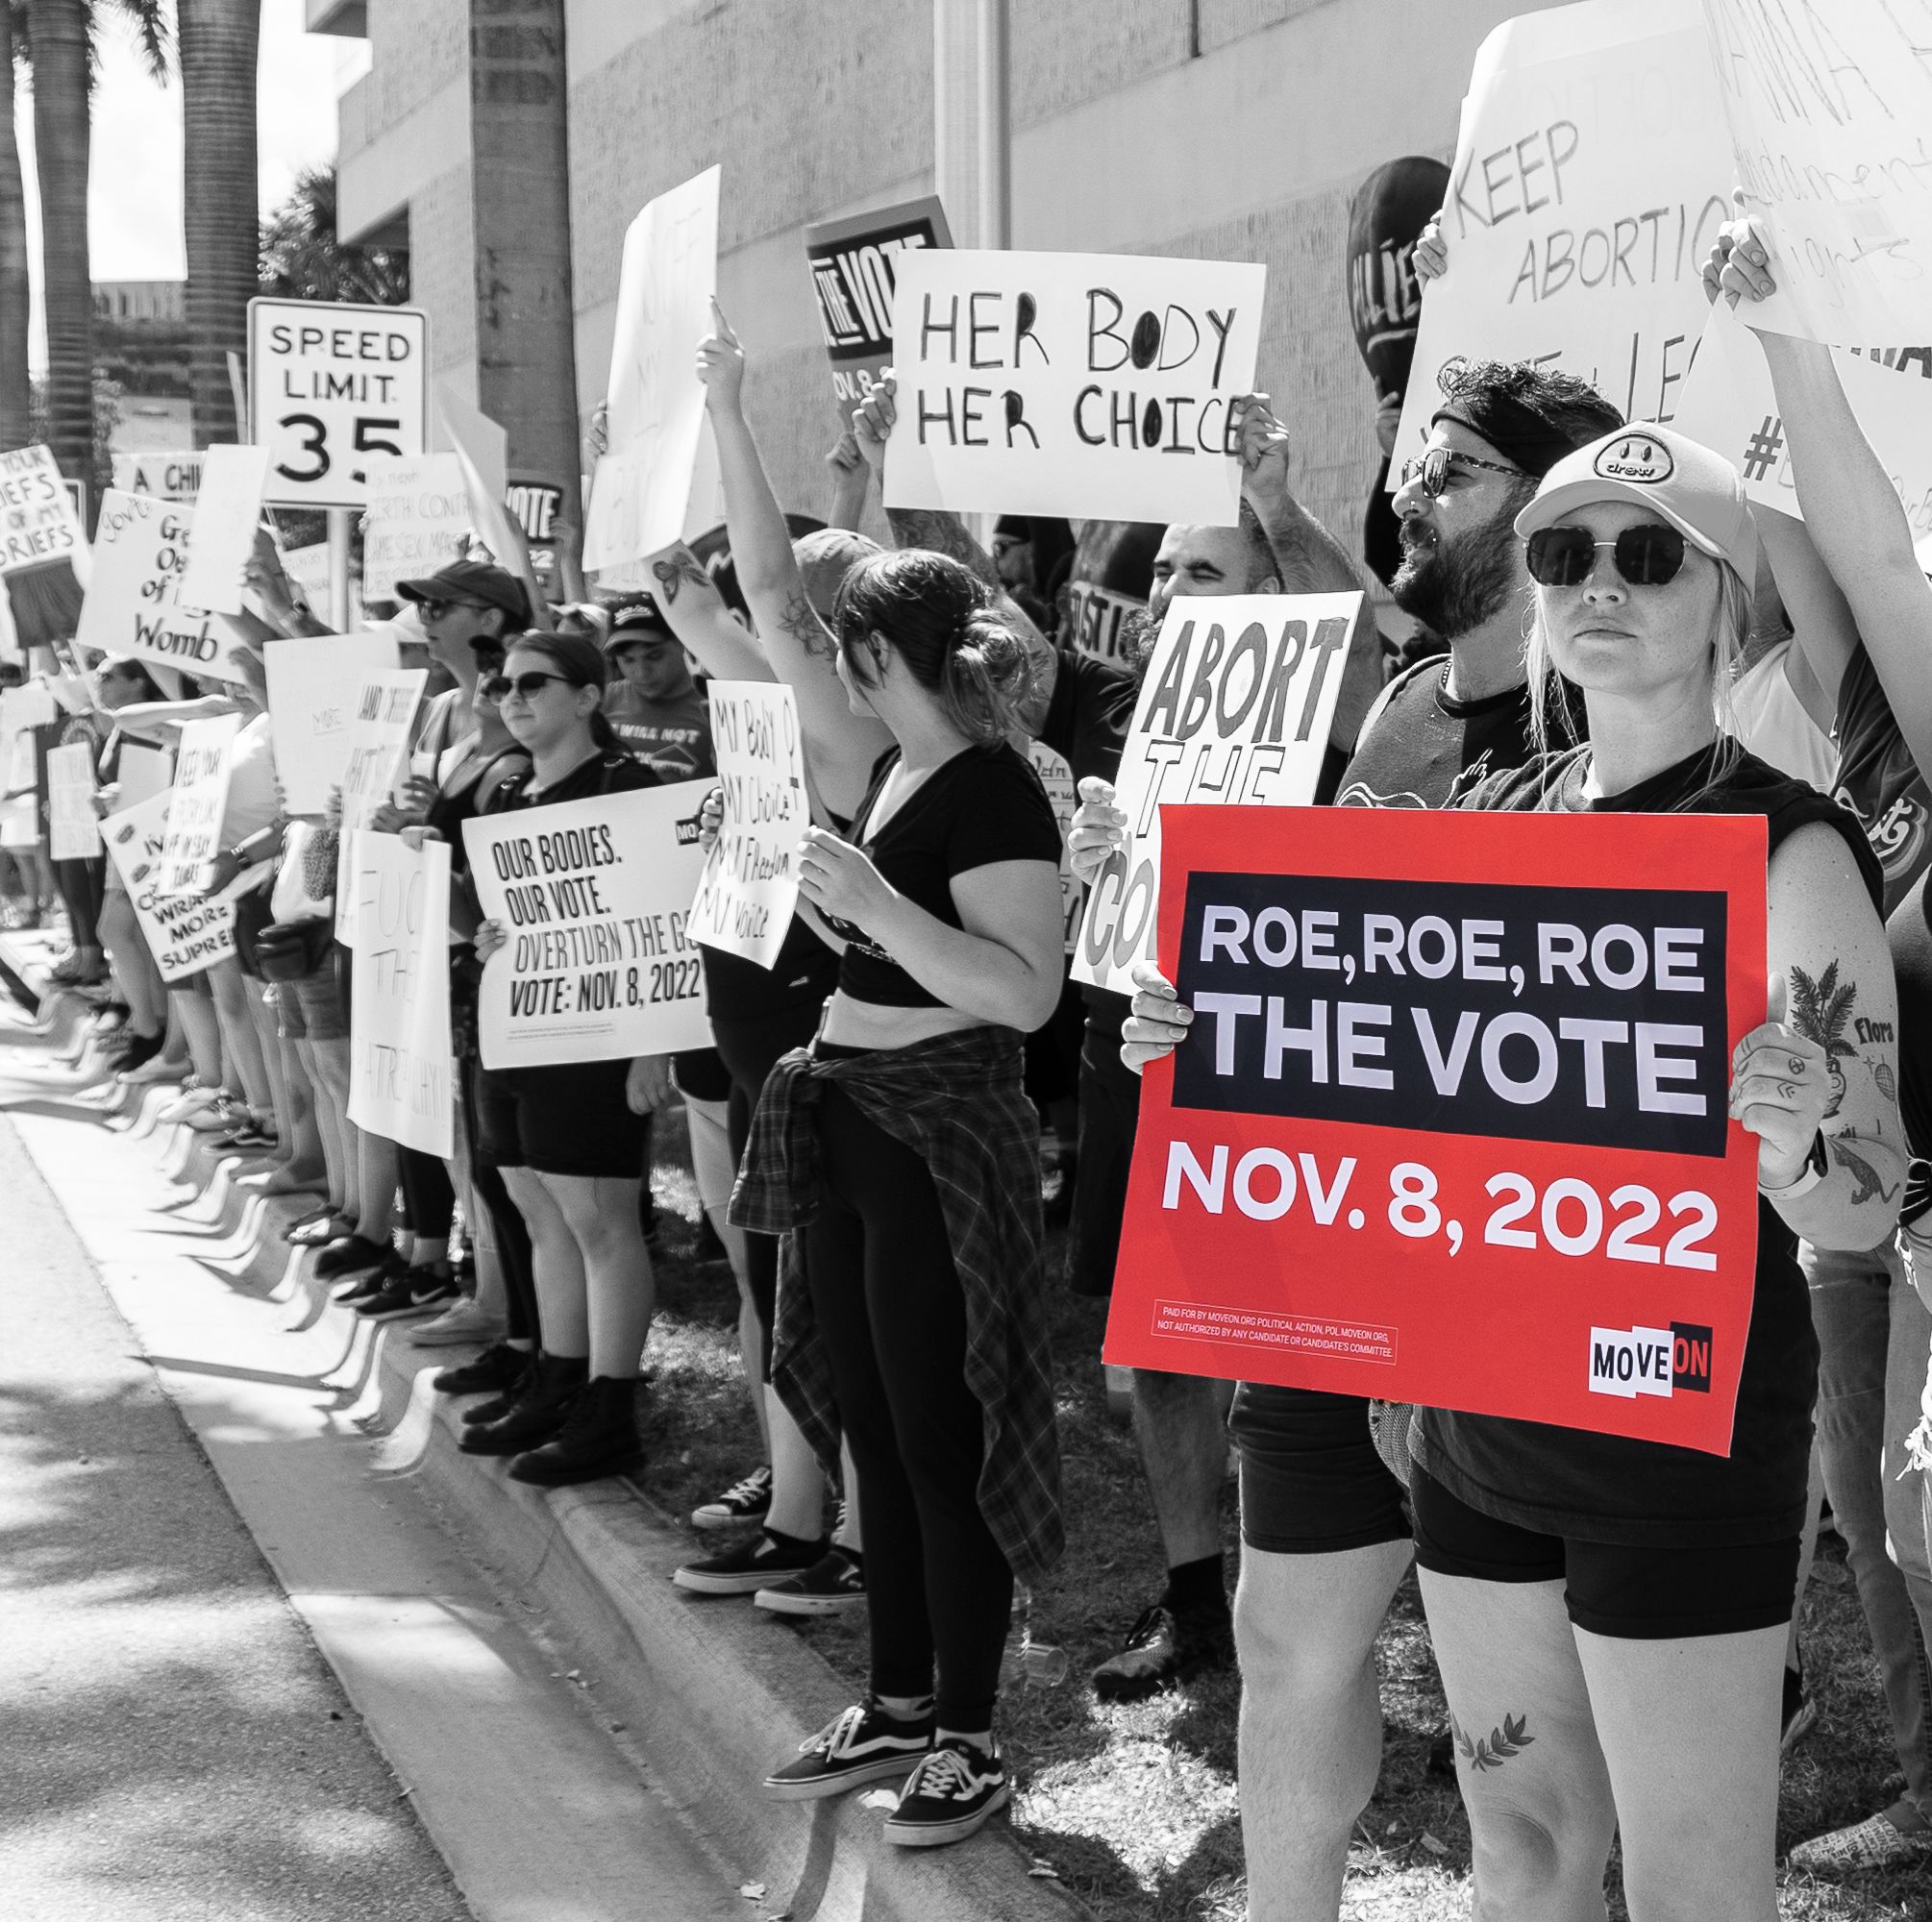 Since the Supreme Court overturned <I>Roe v. Wade </I>in June, eliminating the constitutional right to abortion and sending the issue back to the states, pro-abortion rights politicians and activists have been urging supporters to do one thing: vote in the midterms this November. Nearly 21 million women in the U.S. have already lost access to almost all elective abortions in their home states, per <I>The Washington Post</I>, and the elections this fall will be crucial in determining the future of reproductive rights across the country.  <br><br>